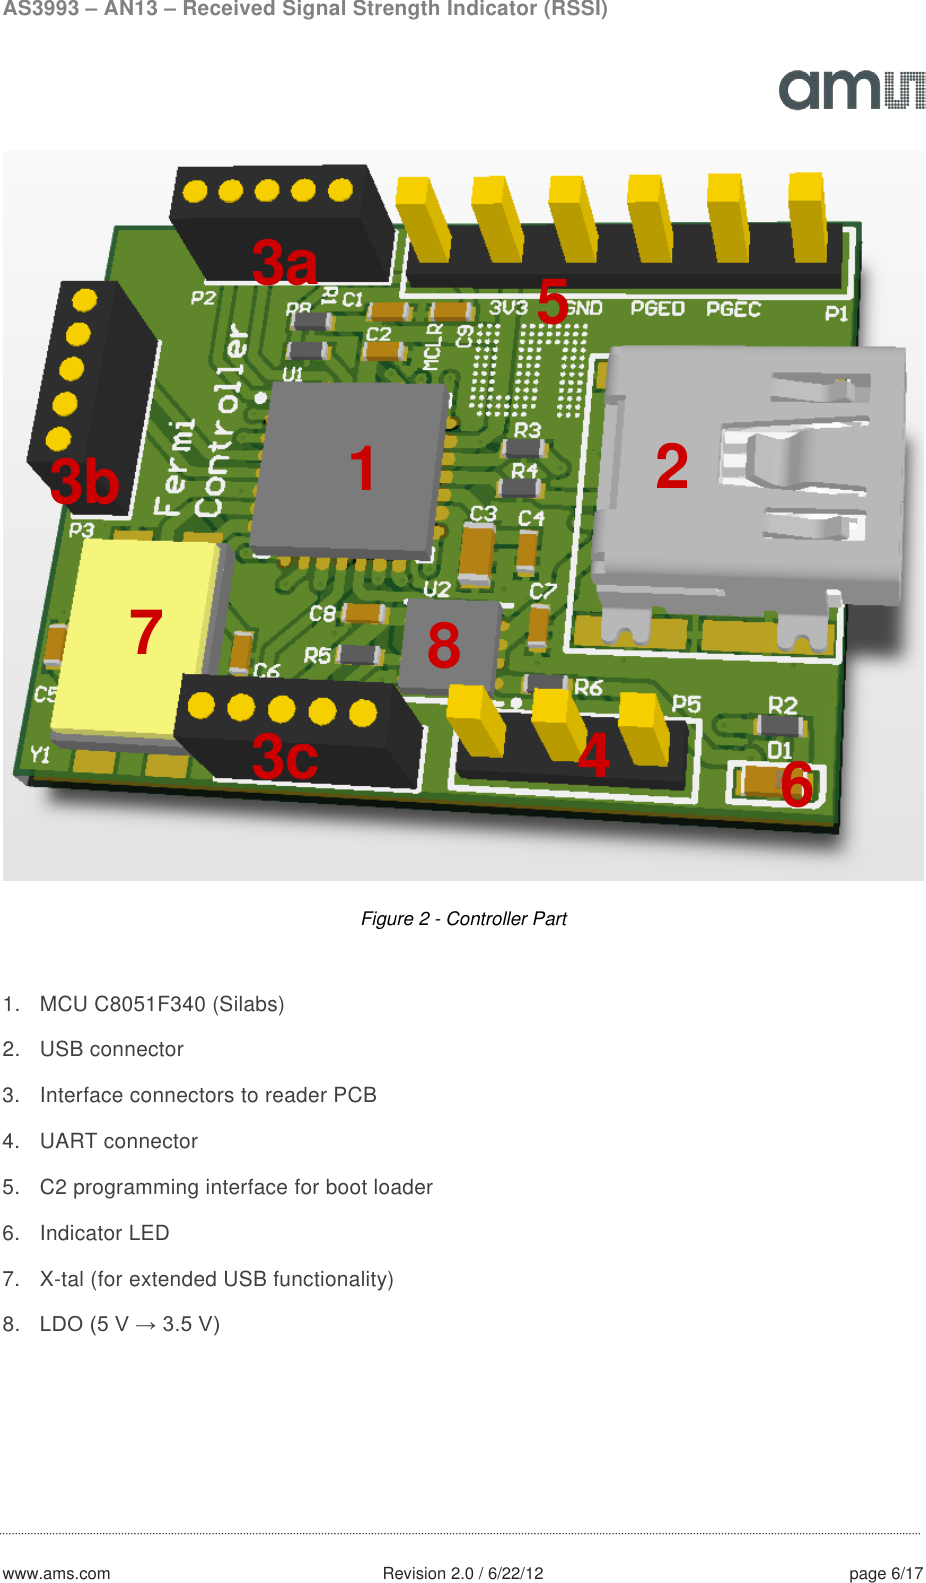 AS3993 – AN13 – Received Signal Strength Indicator (RSSI)  www.ams.com              Revision 2.0 / 6/22/12 page 6/17   Figure 2 - Controller Part  1. MCU C8051F340 (Silabs) 2. USB connector 3. Interface connectors to reader PCB 4. UART connector 5. C2 programming interface for boot loader 6. Indicator LED 7.  X-tal (for extended USB functionality) 8. LDO (5 V → 3.5 V)    1 3a 2 5 4 6 3c 3b 7 8 